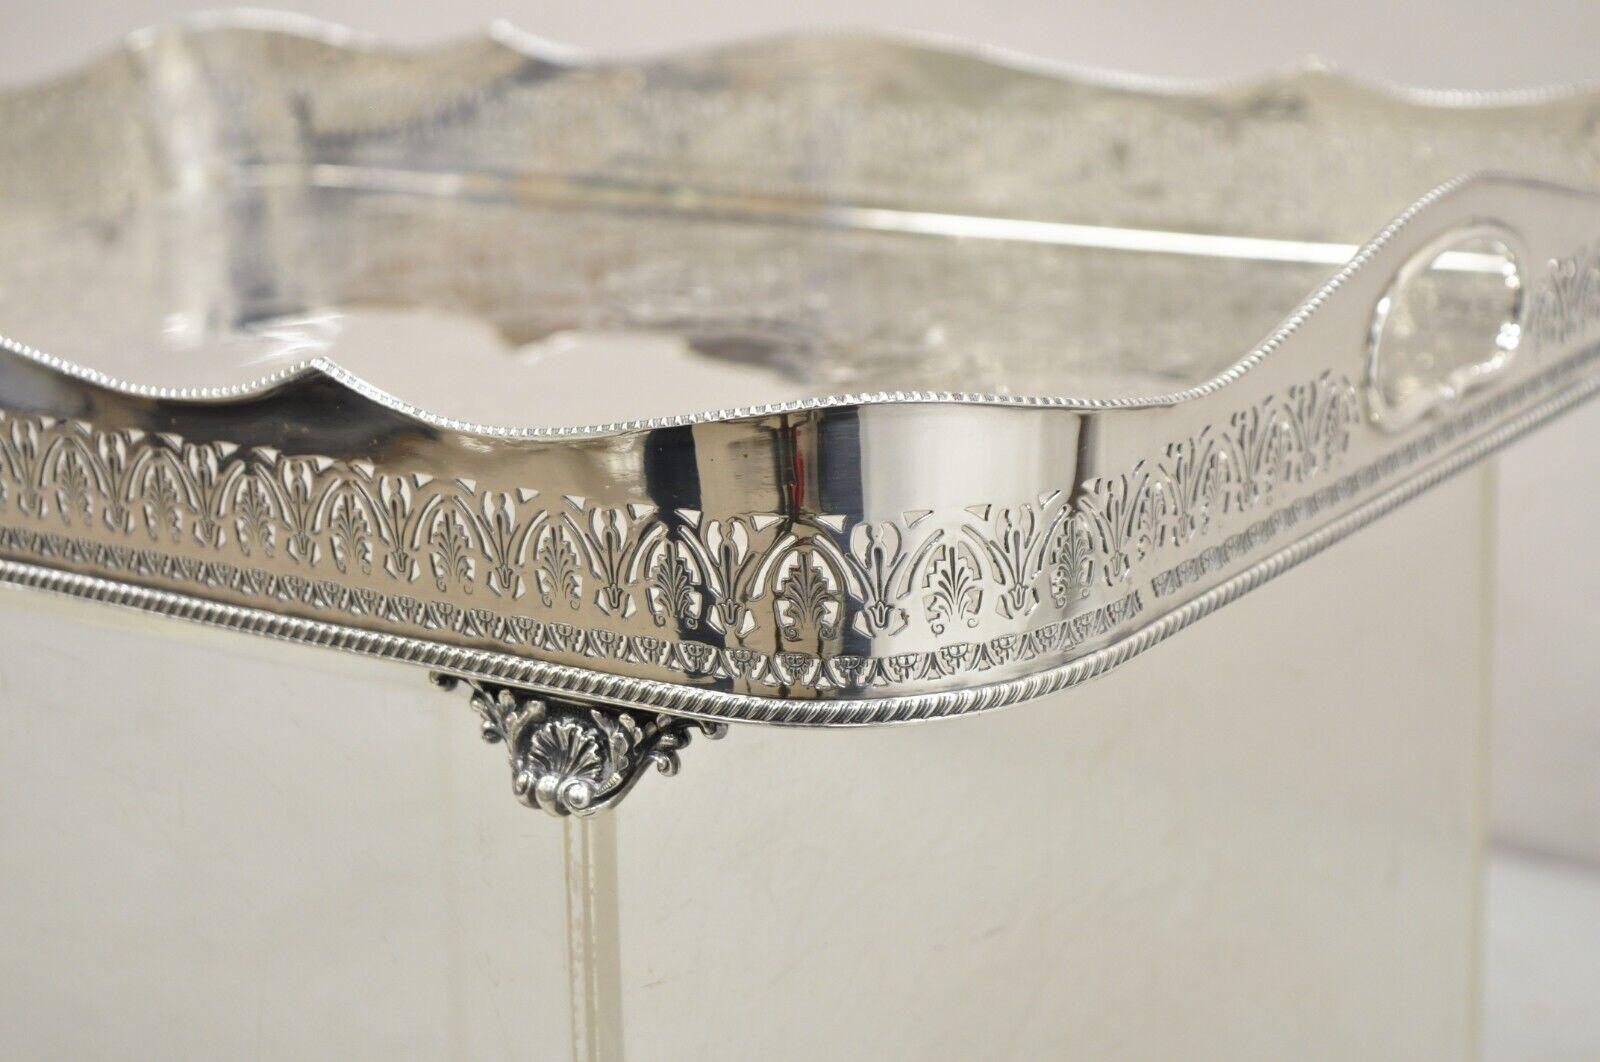 Antique English Sheffield Robert Adams Style Silver Plated Scalloped Serving Platter Tray. Circa Early to Mid 20th Century. Measurements: 3